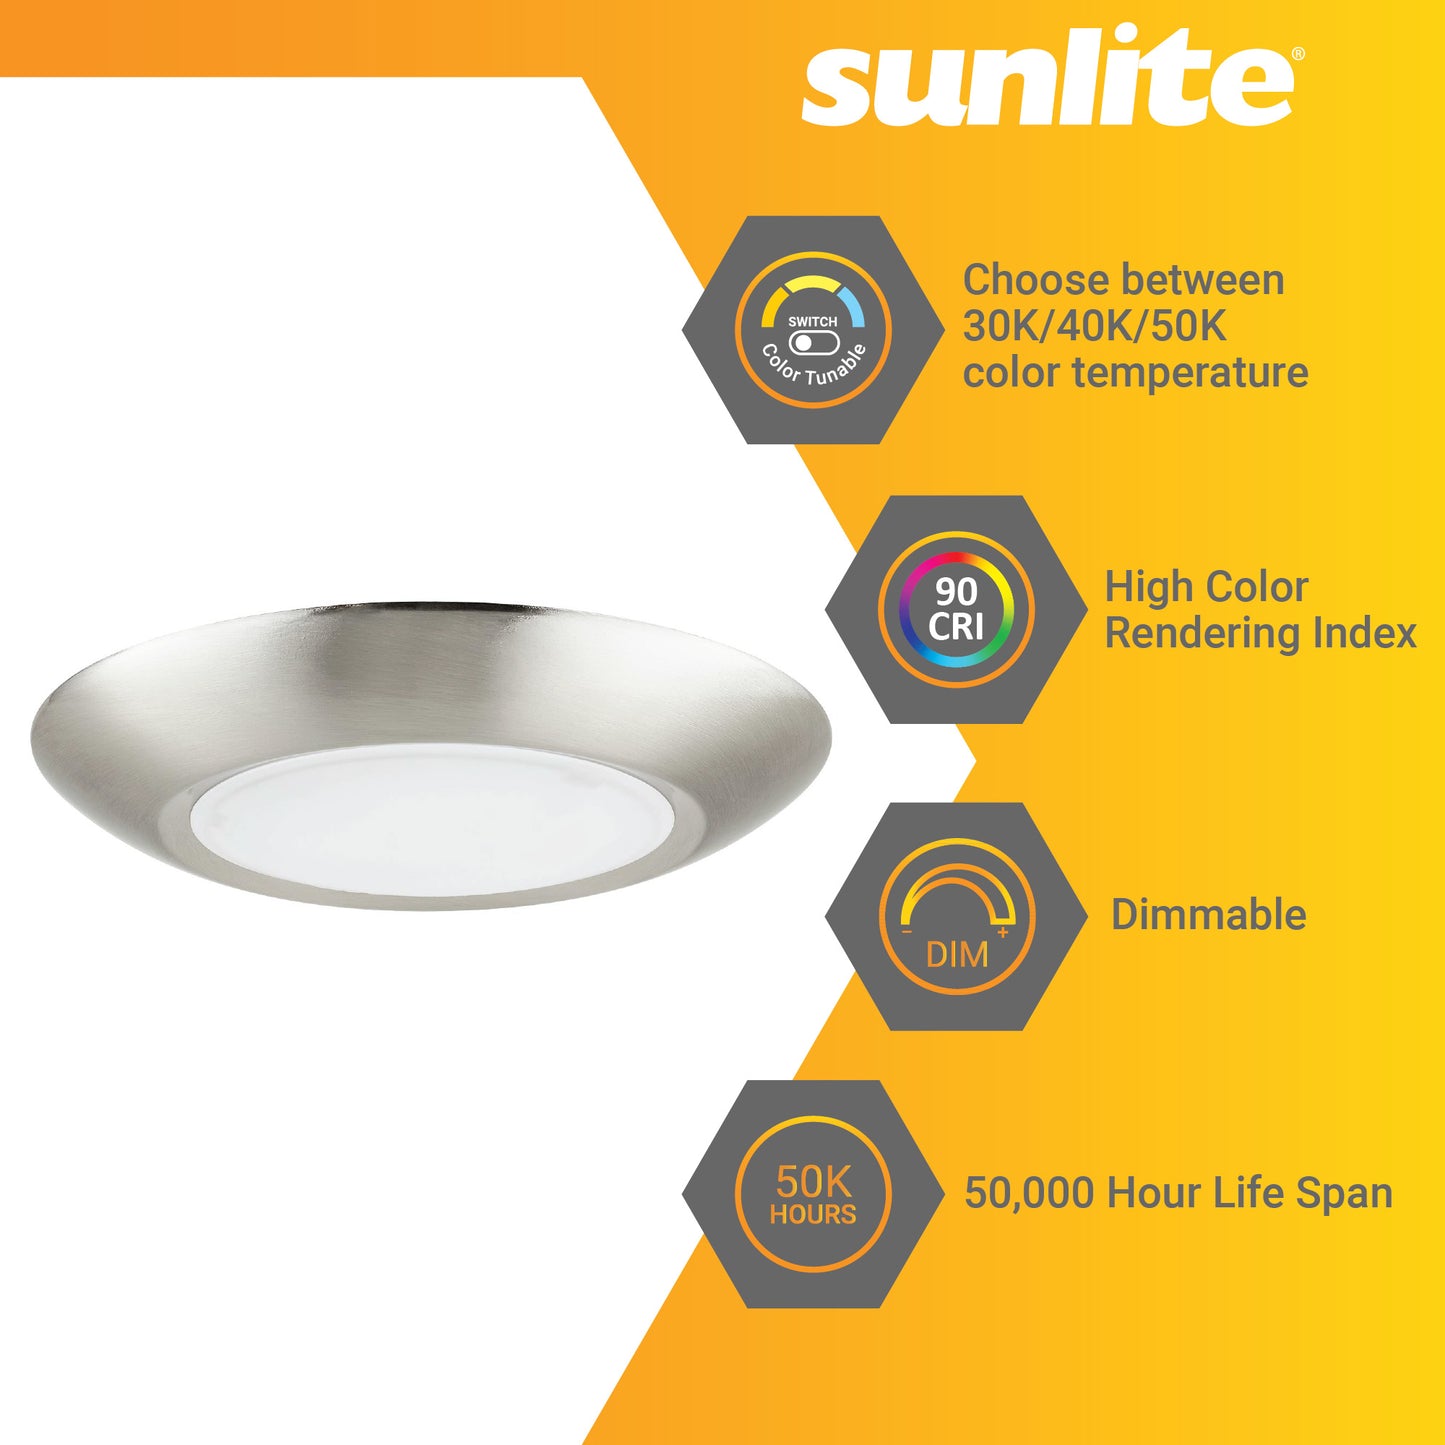 Sunlite 6-Inch Round LED Mini Flat Panel Fixture, 15 Watts (60W Equivalent), 120 Volts, Color Tunable (30K/40K/50K), 800 Lumens, Dimmable, 50,000 Hour Life Span, ETL Listed, Brushed Nickel Finish